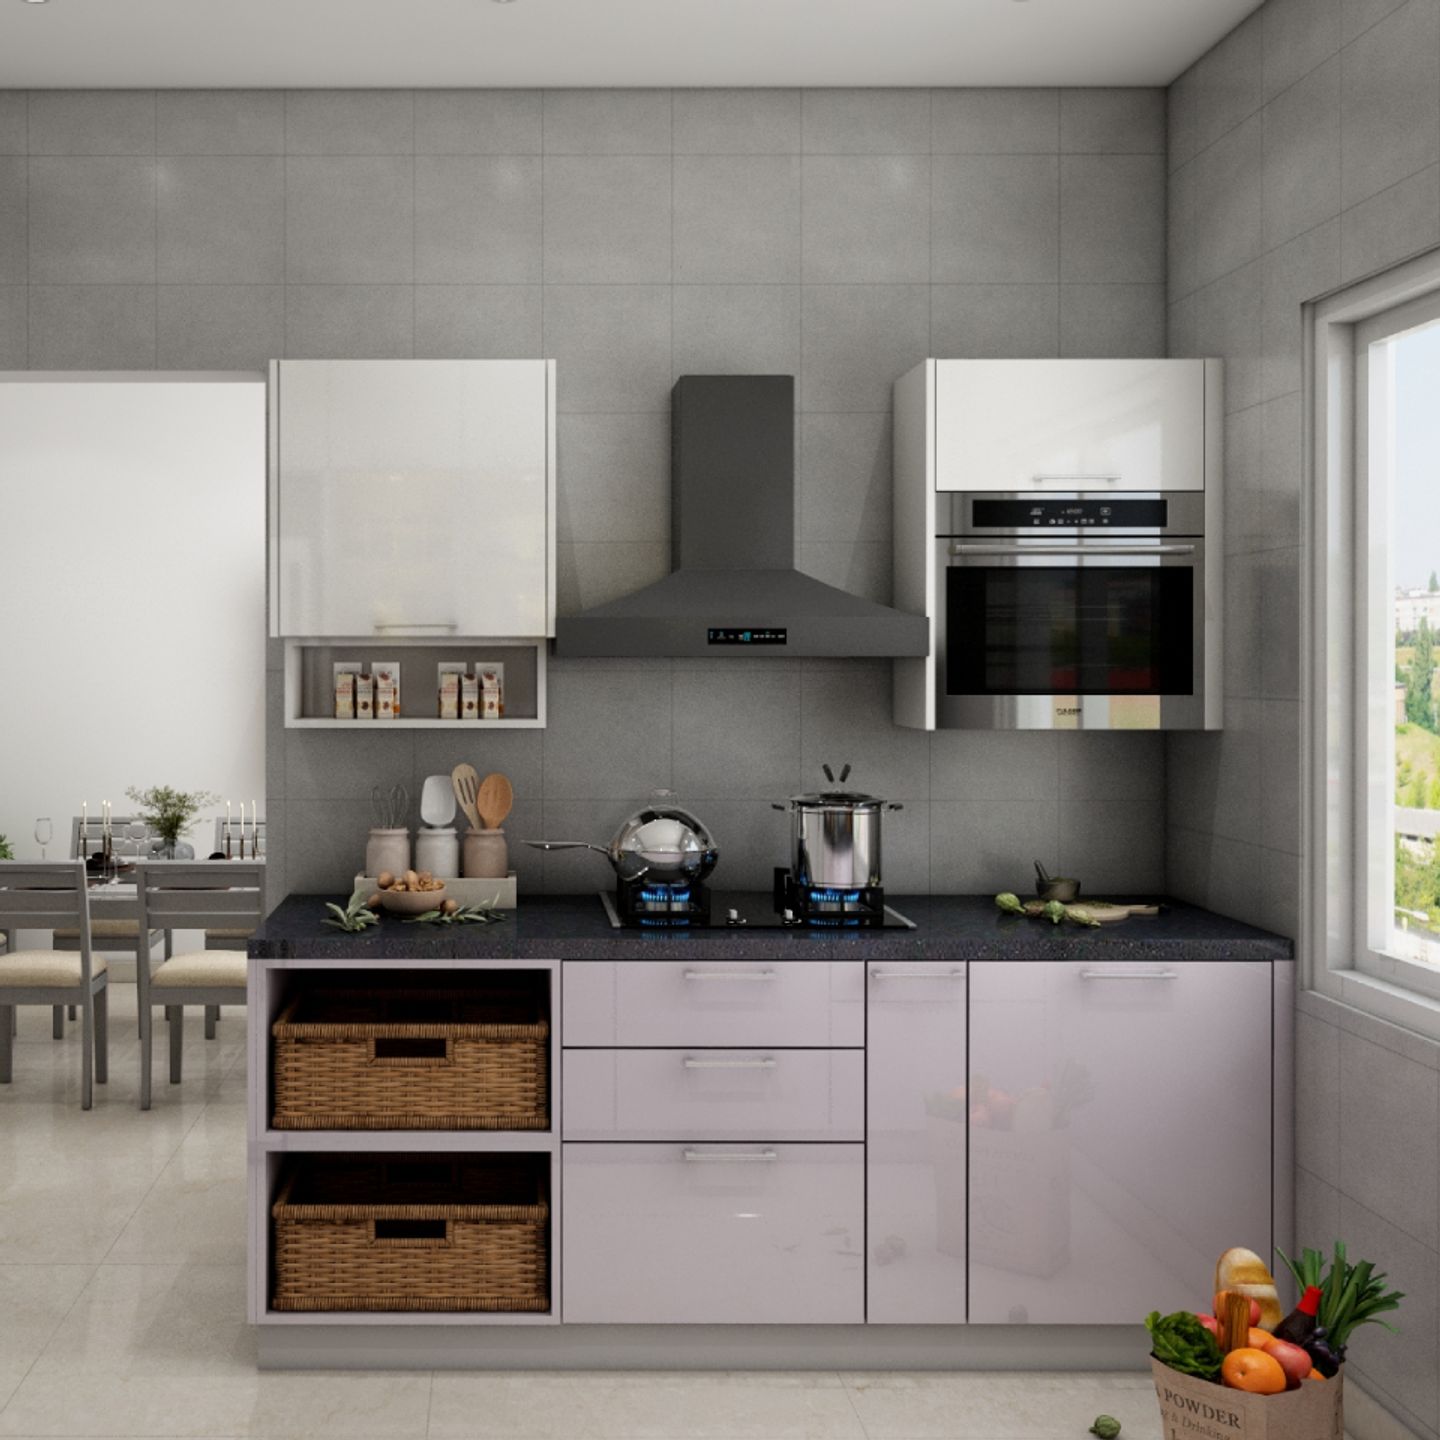 Grey Wall Tiles Design For Kitchens - Livspace